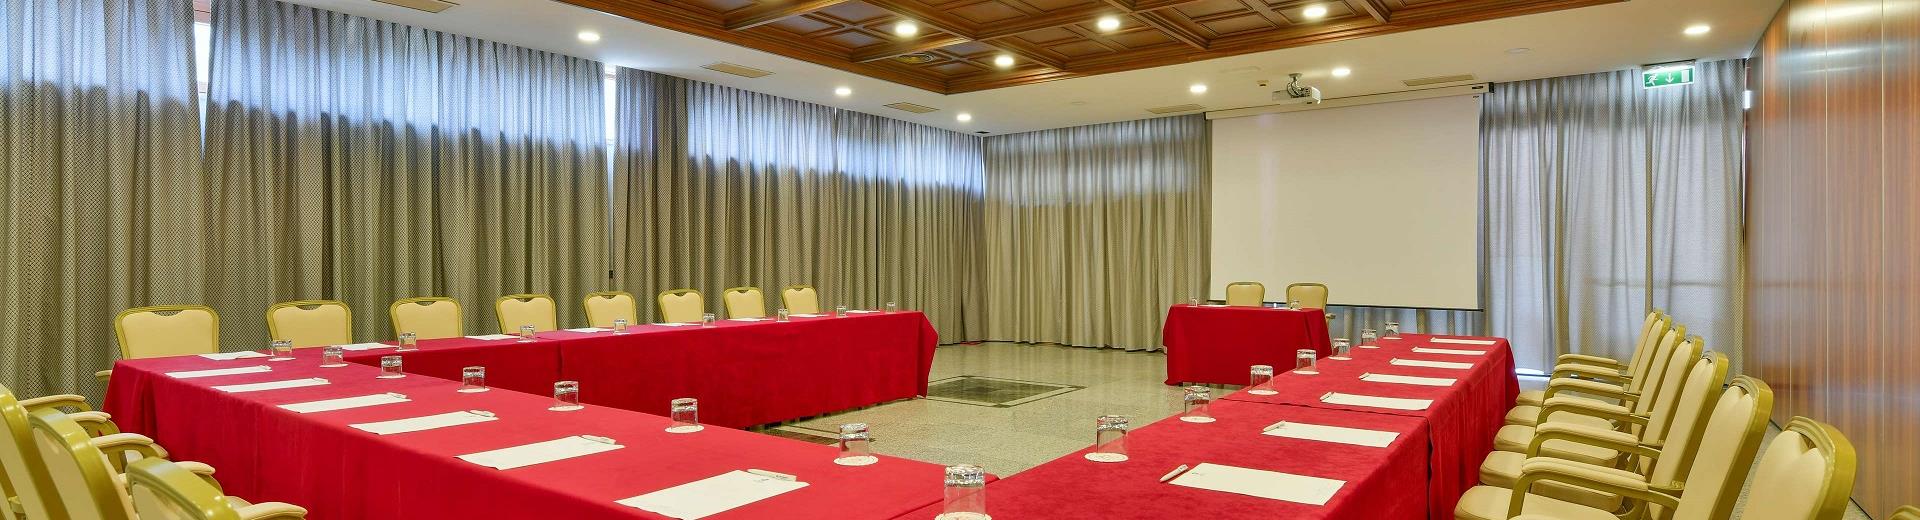 Organize your meetings in Naples with Hotel Ferrari: discover the details of our meeting rooms with a capacity of up to 300 people!